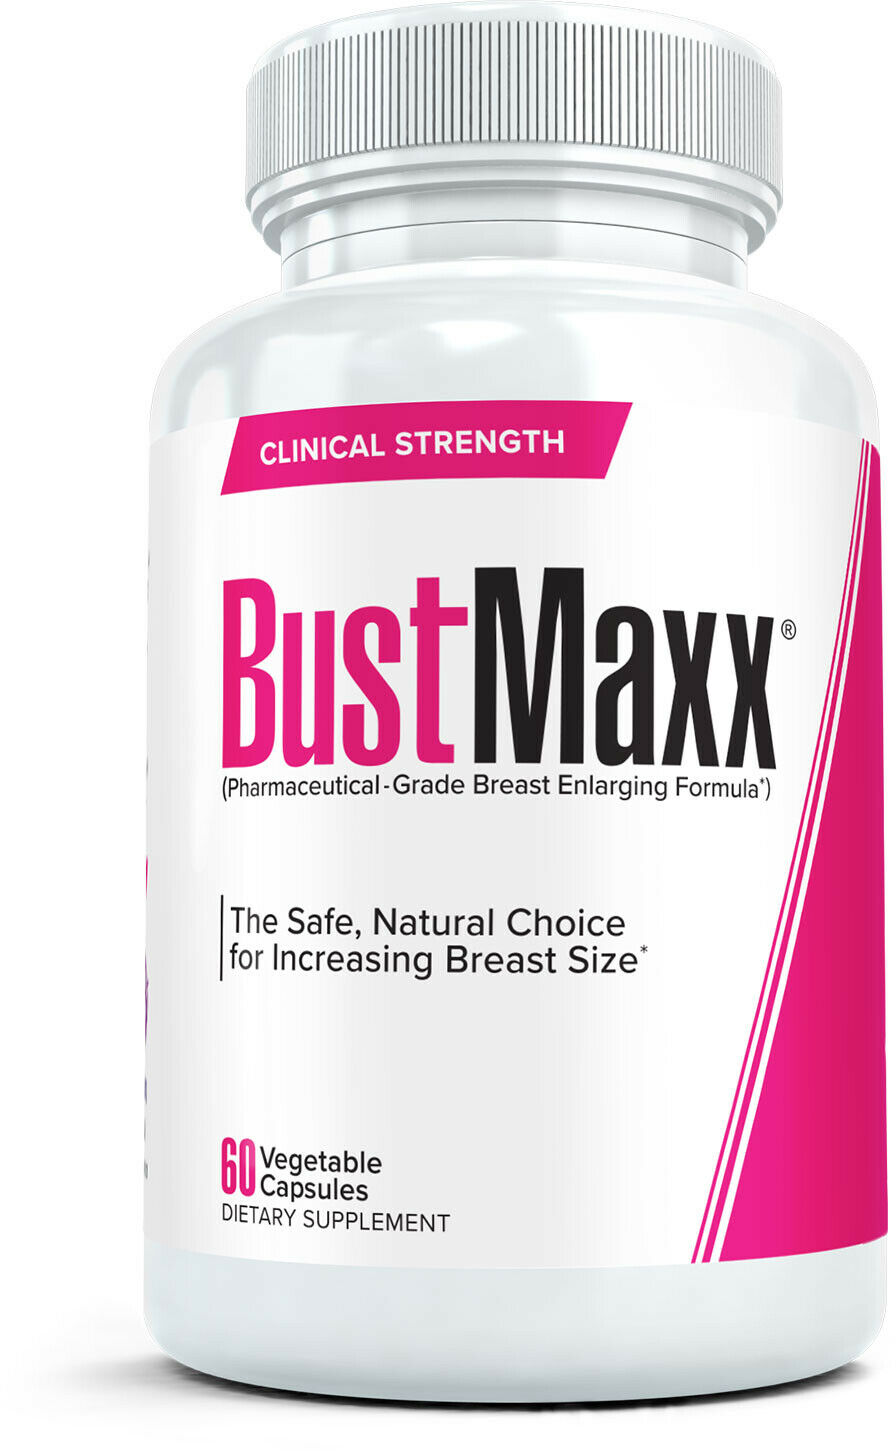 Bustmaxx #1 Most Trusted All-natural Breast Enlargement & Enhancement Supplement